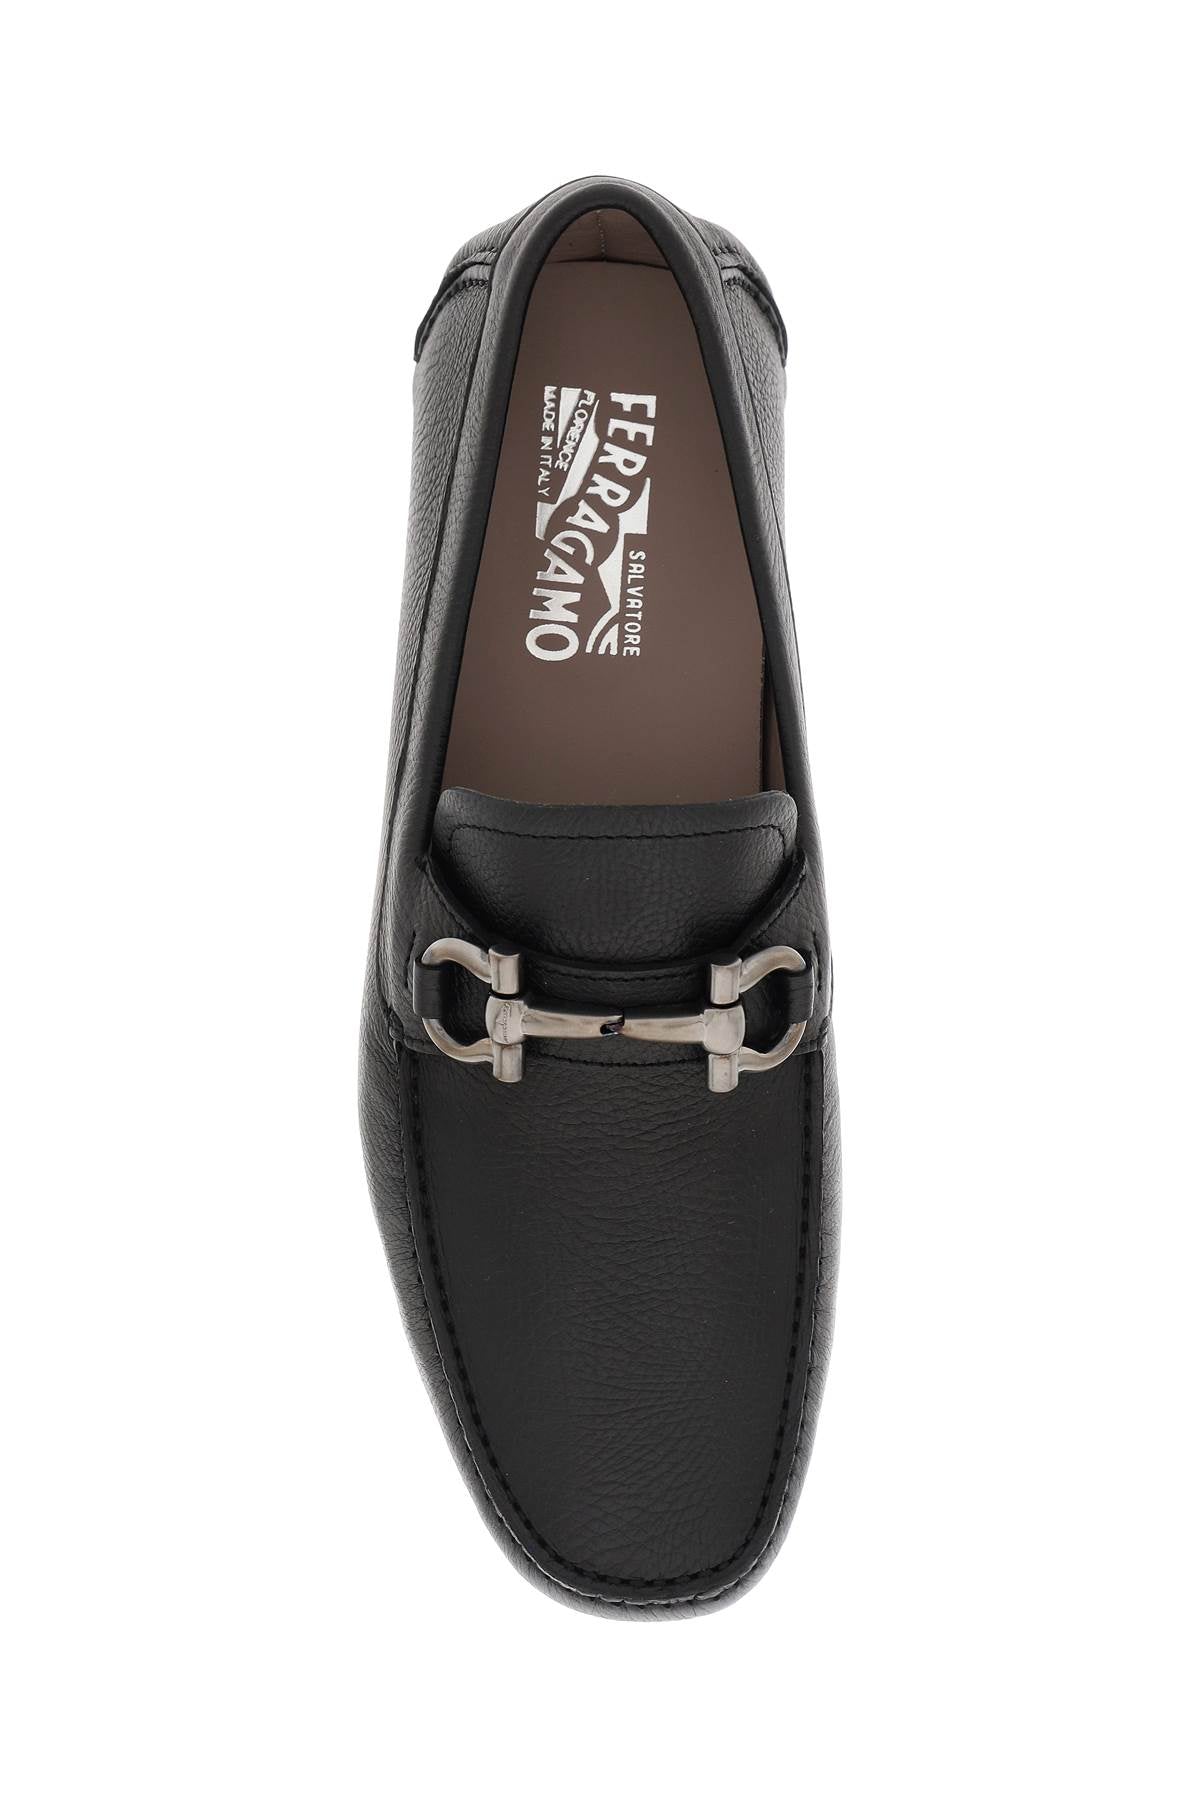 FERRAGAMO Grained Leather Moccasins with Gancini Hook Detail